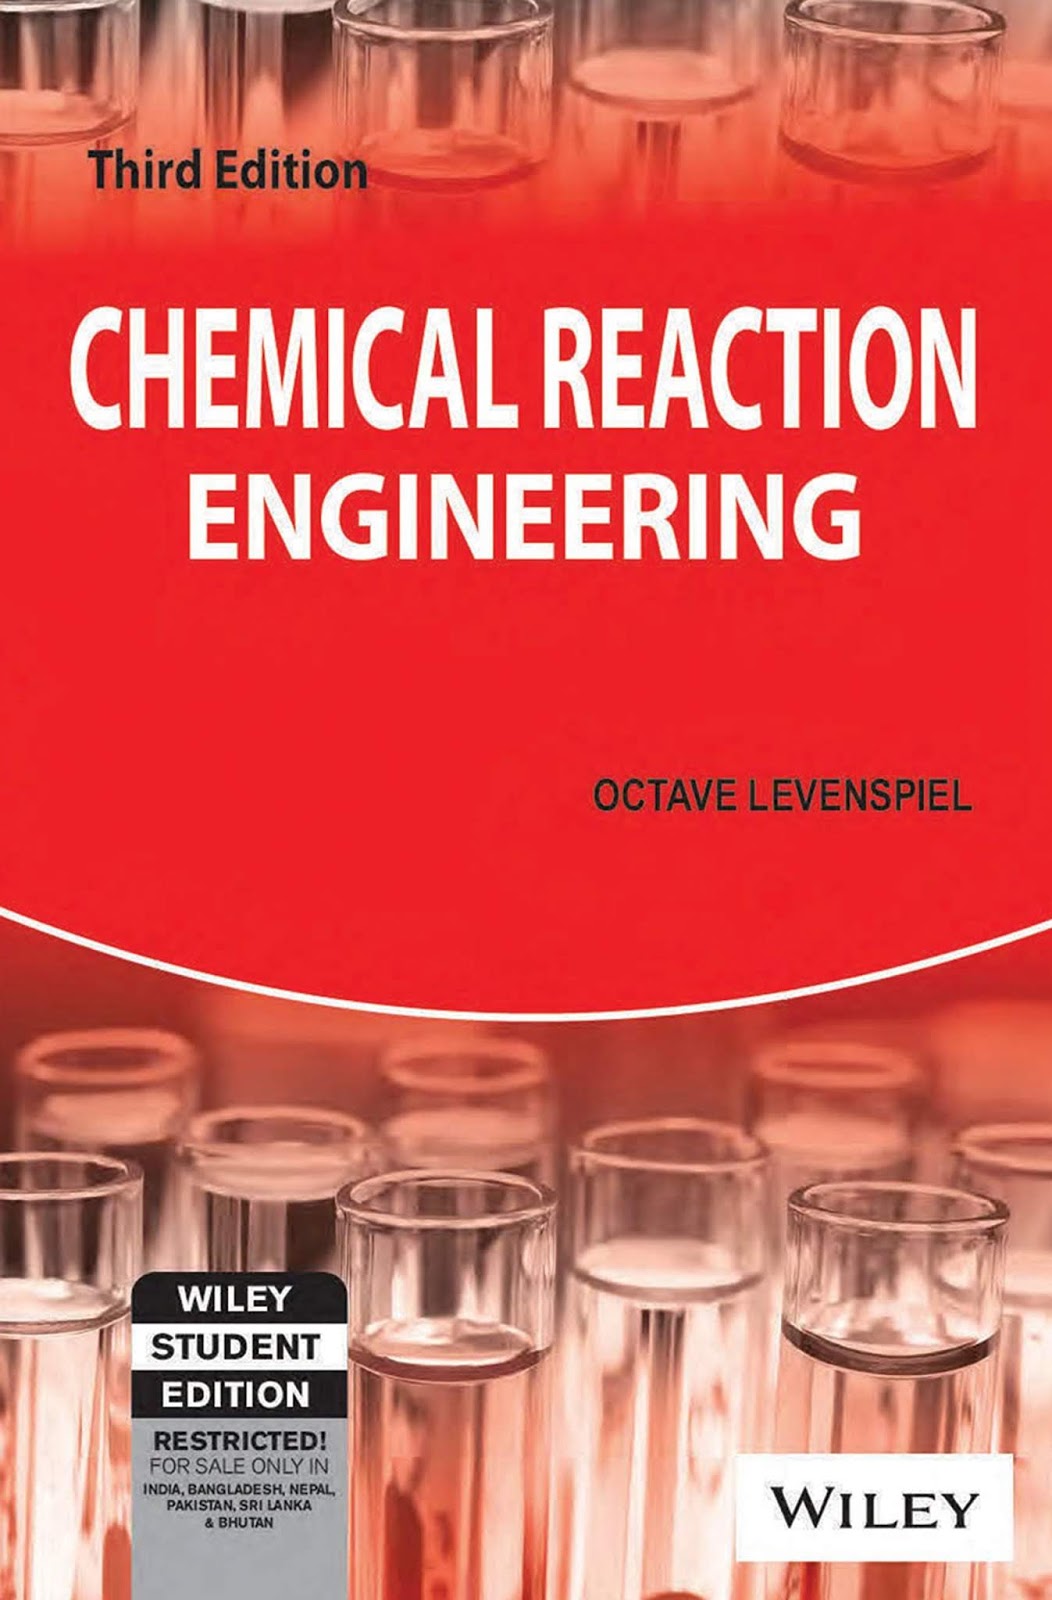 CHEMICAL ENGINEERING books pdf: Chemical reaction engineering book and